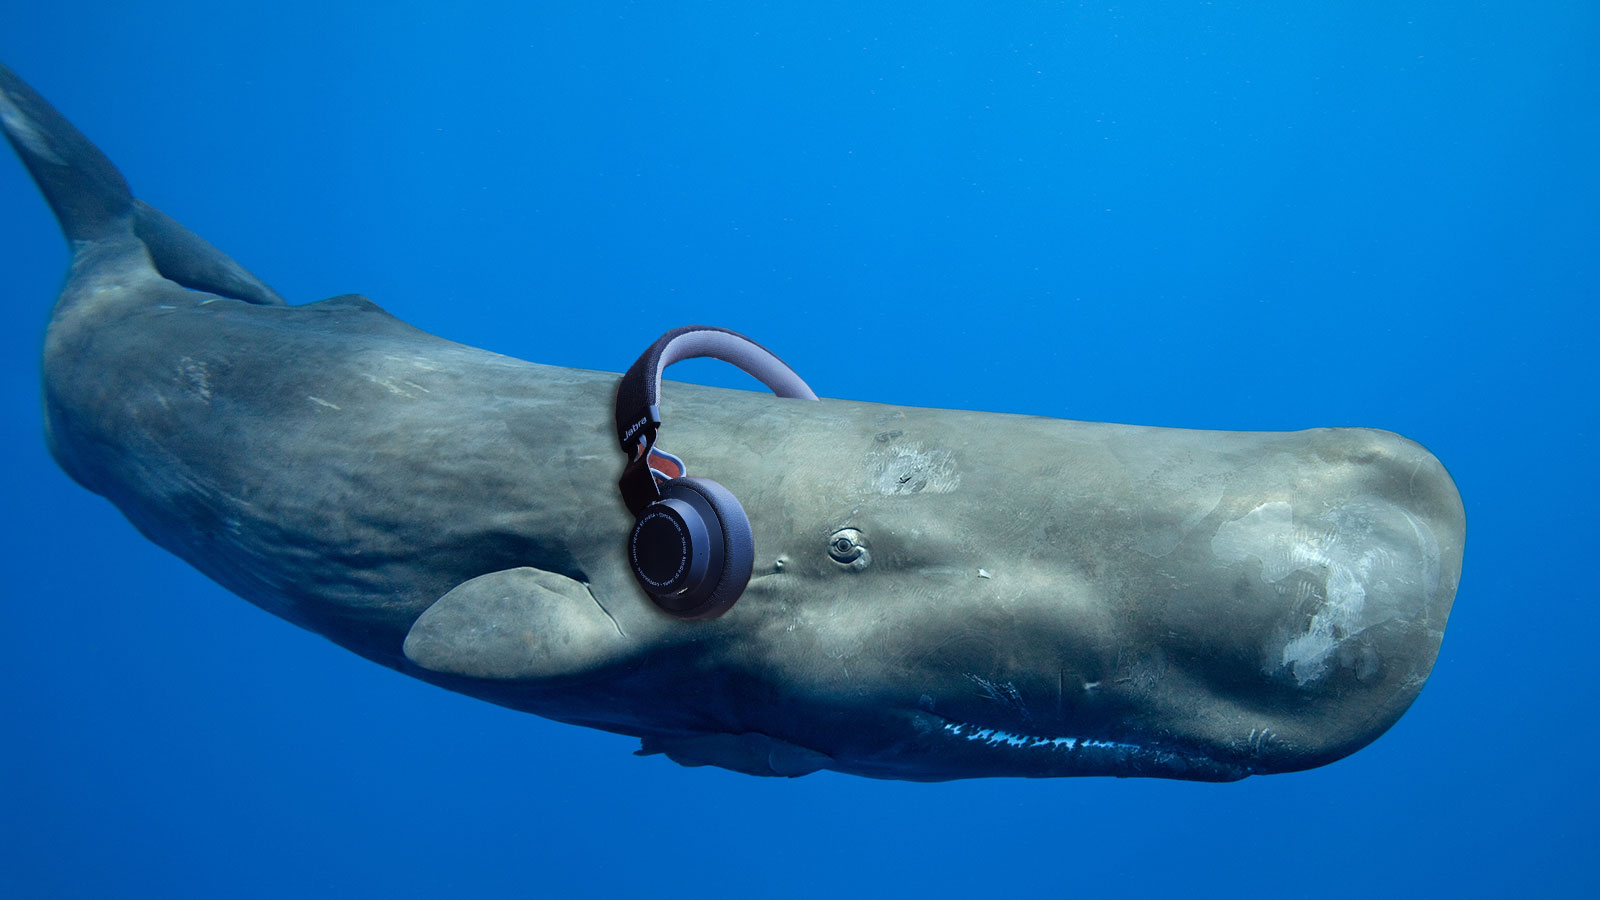 Starved For Human Voices Listen To A Podcast About Whale Songs And Climate Change